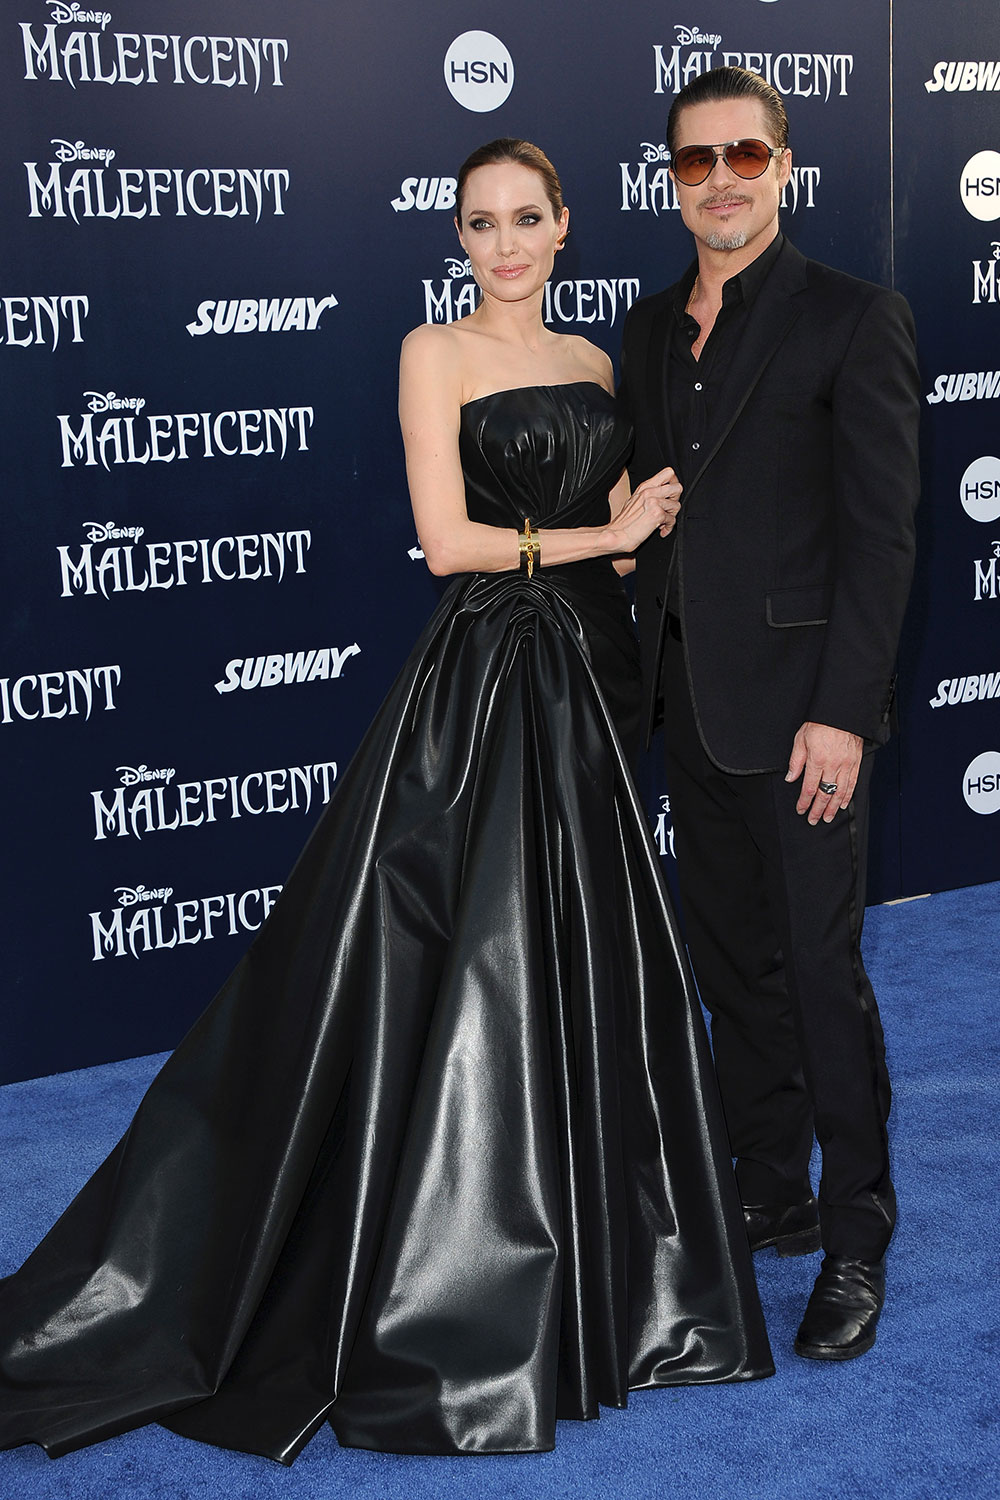 Brad Pitt and Angelina Jolie at the world premiere of Maleficent in 2014